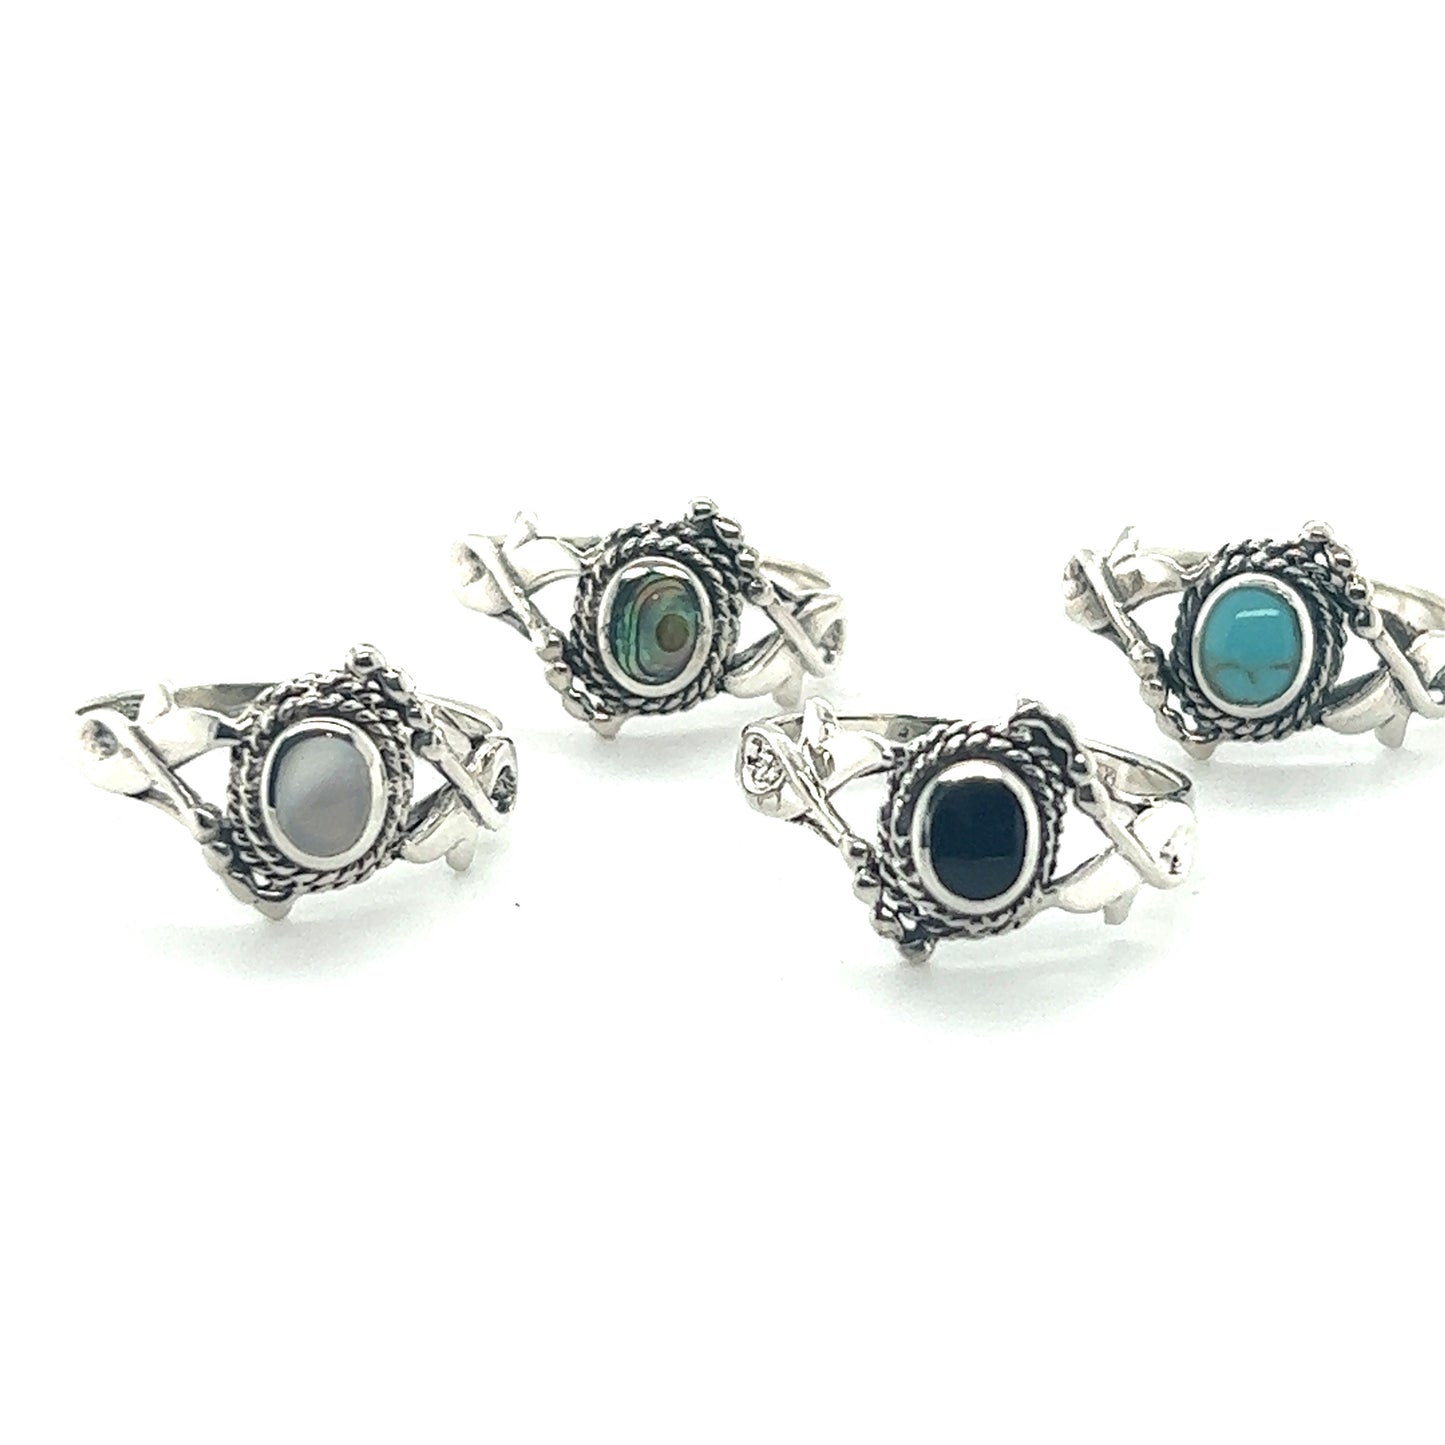 Four Super Silver Decorated Freeform Inlay Stone Rings, giving off a Bali boho vibe.